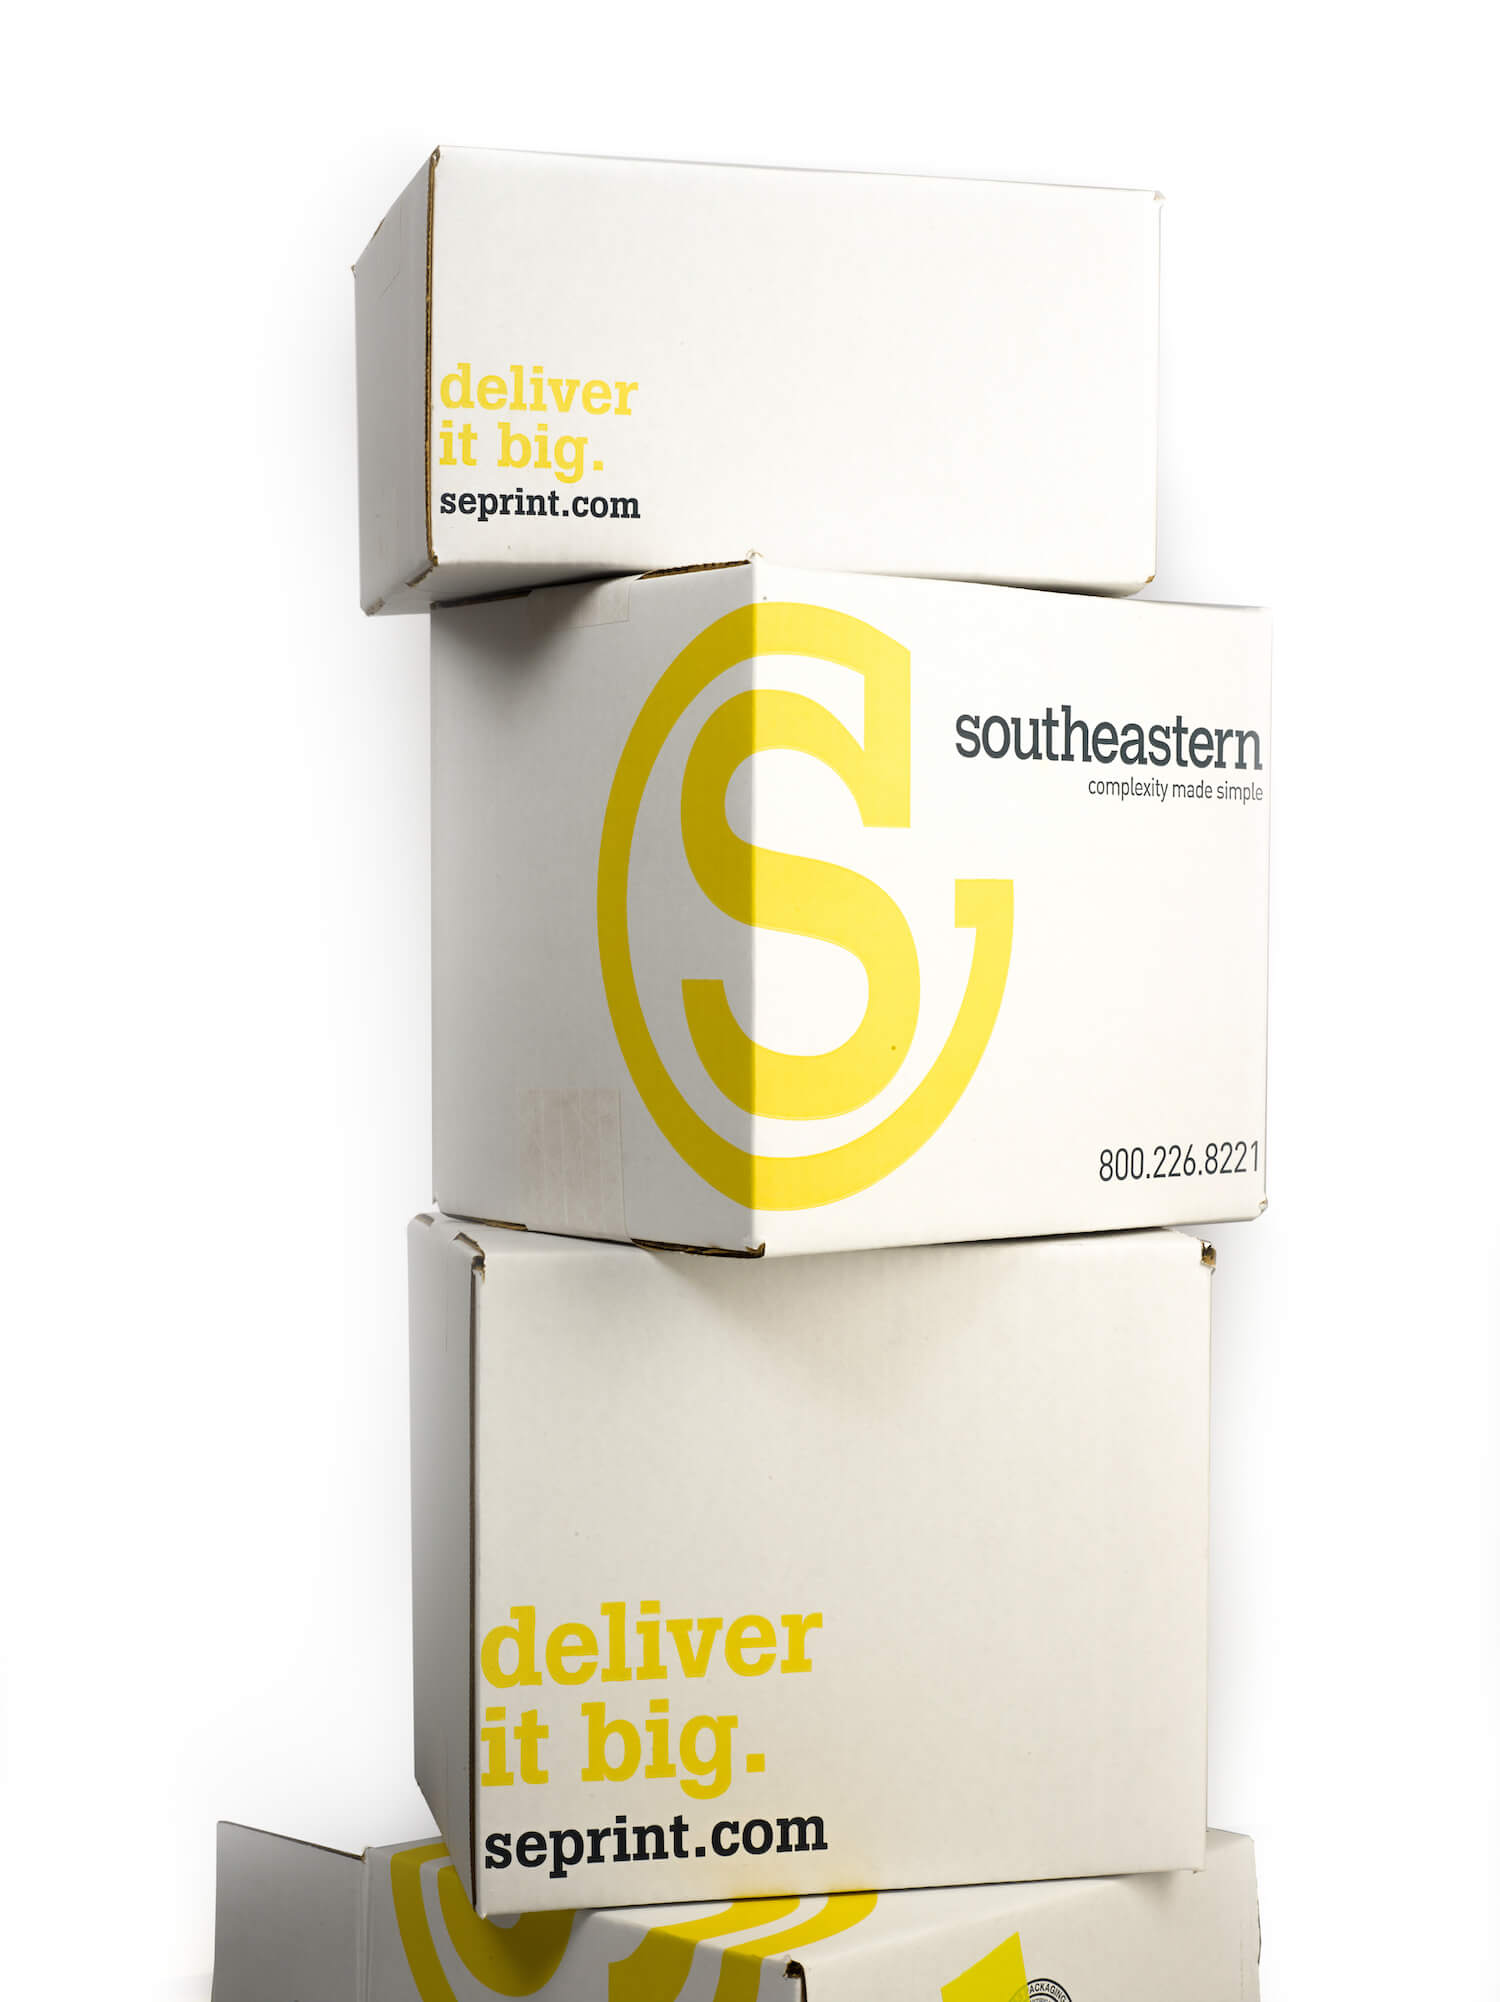 Stack of Southeastern boxes